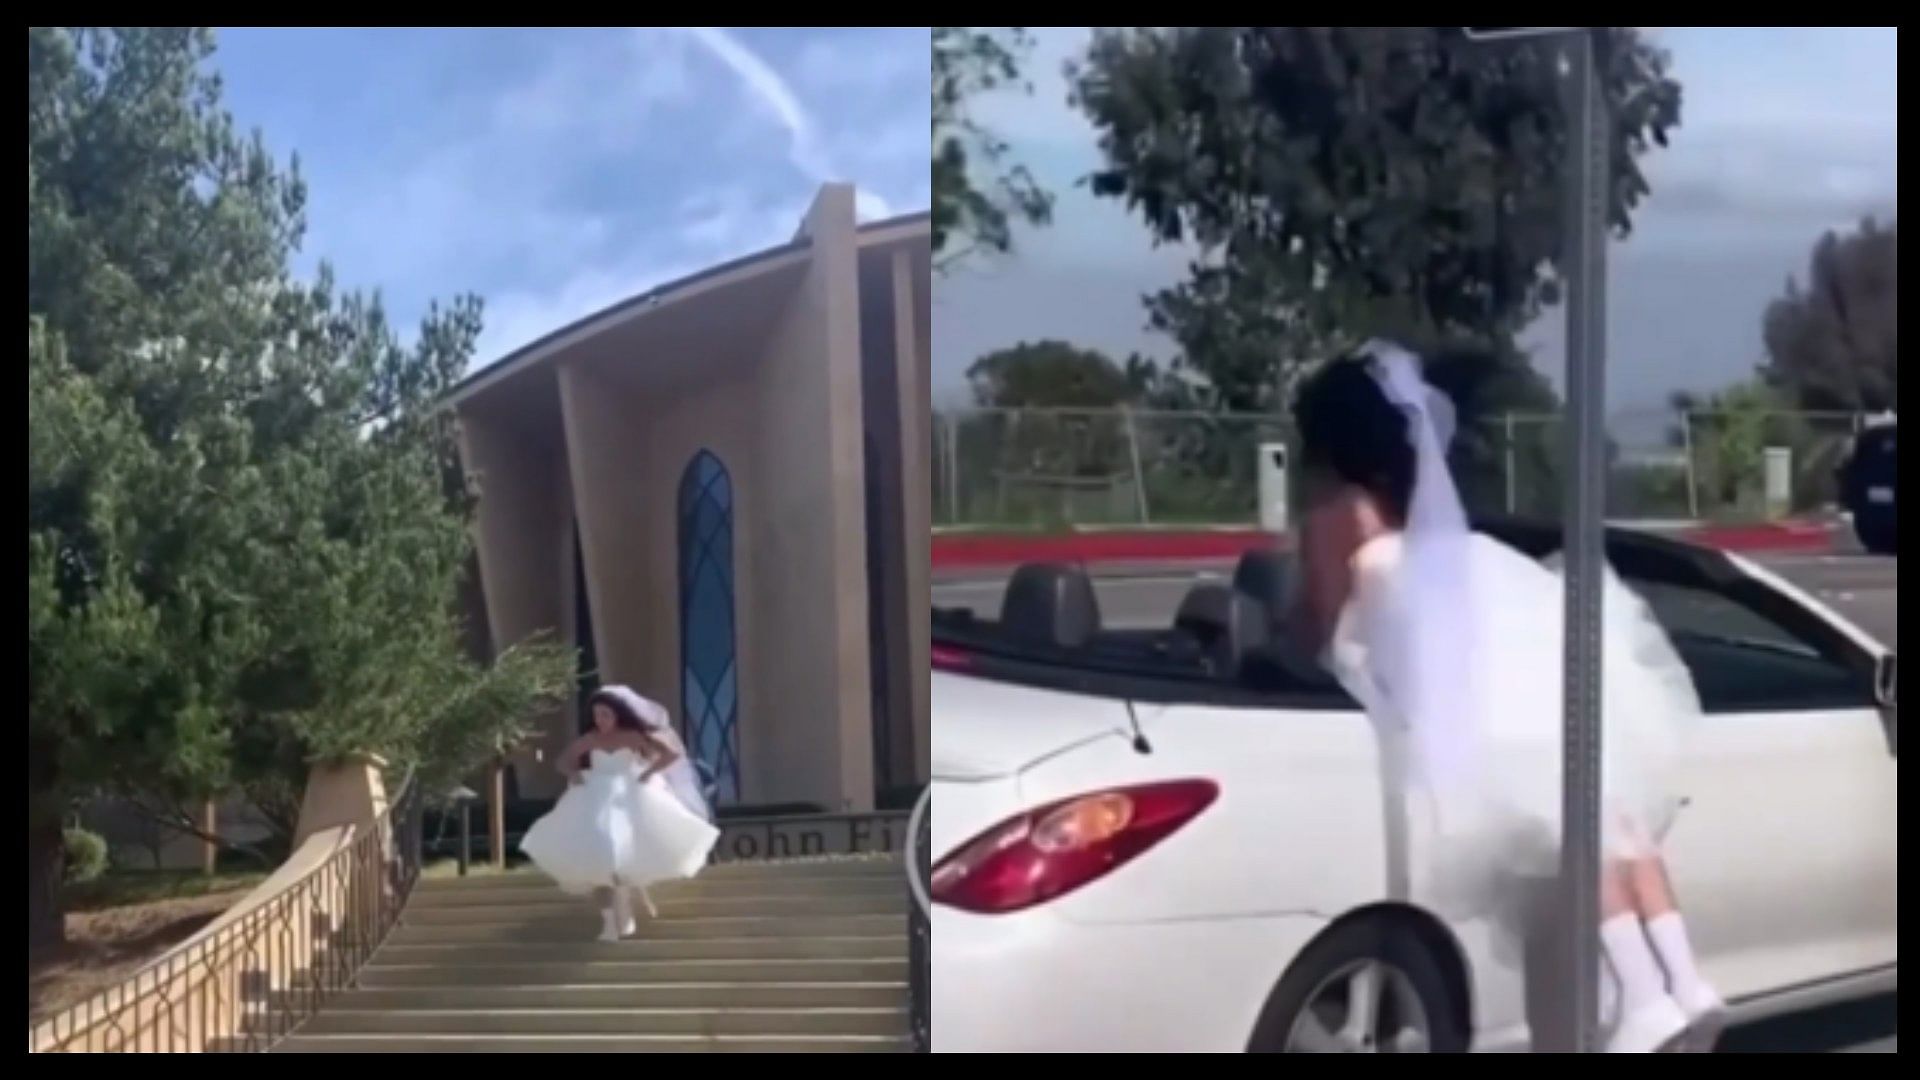 The bride ran away from her wedding in the church video viral on social media